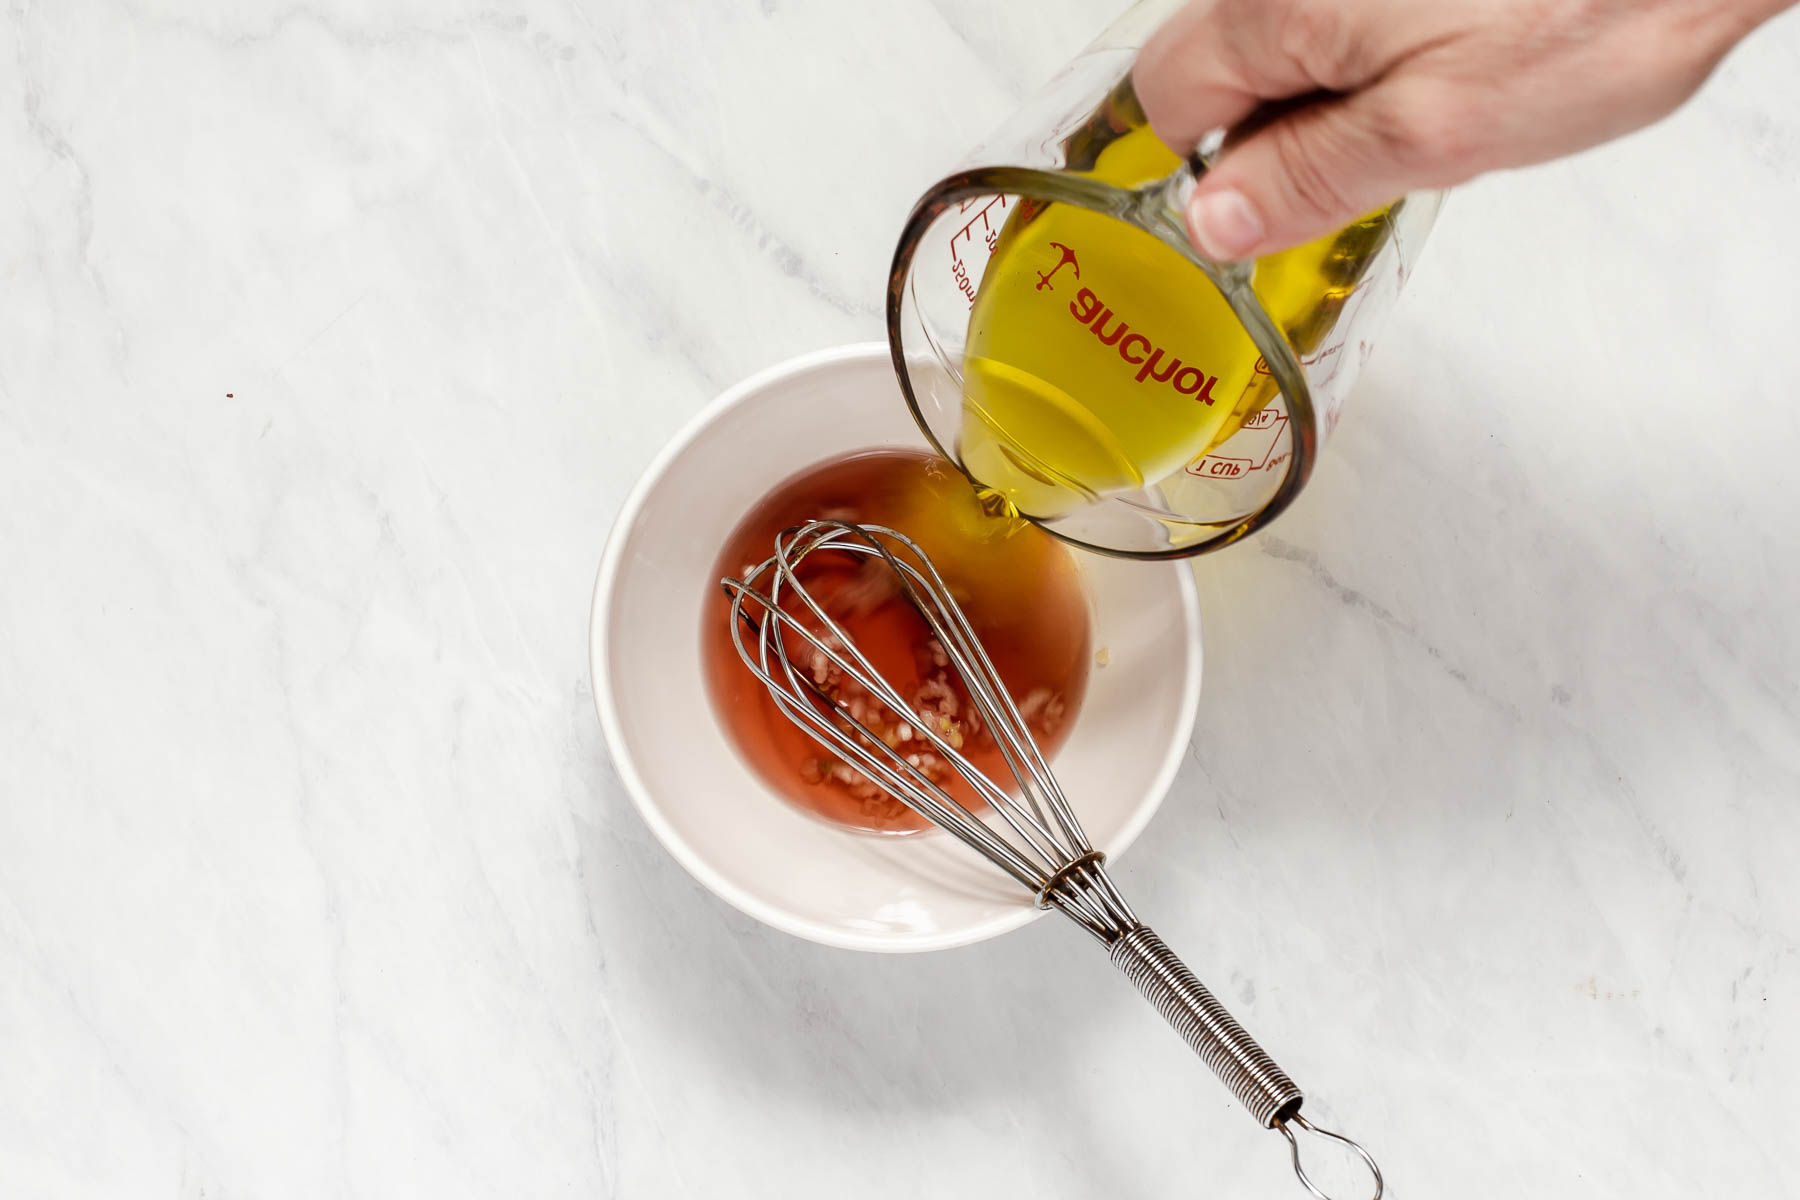 Emulsifying olive oil into a vinaigrette in a small white bowl with whisk.